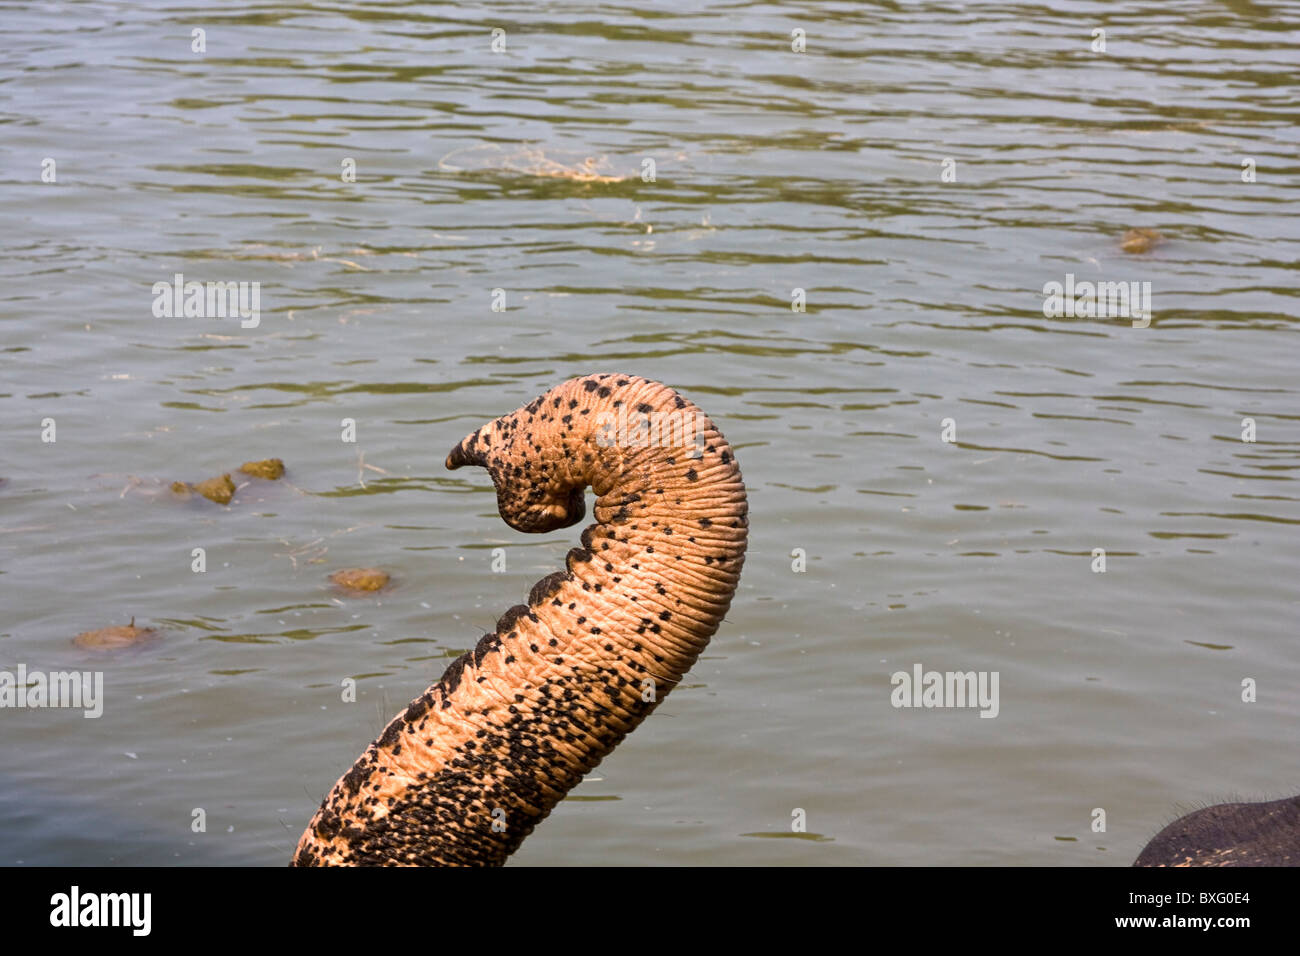 Closeup of elephant trunk with river in background. Thailand Stock Photo